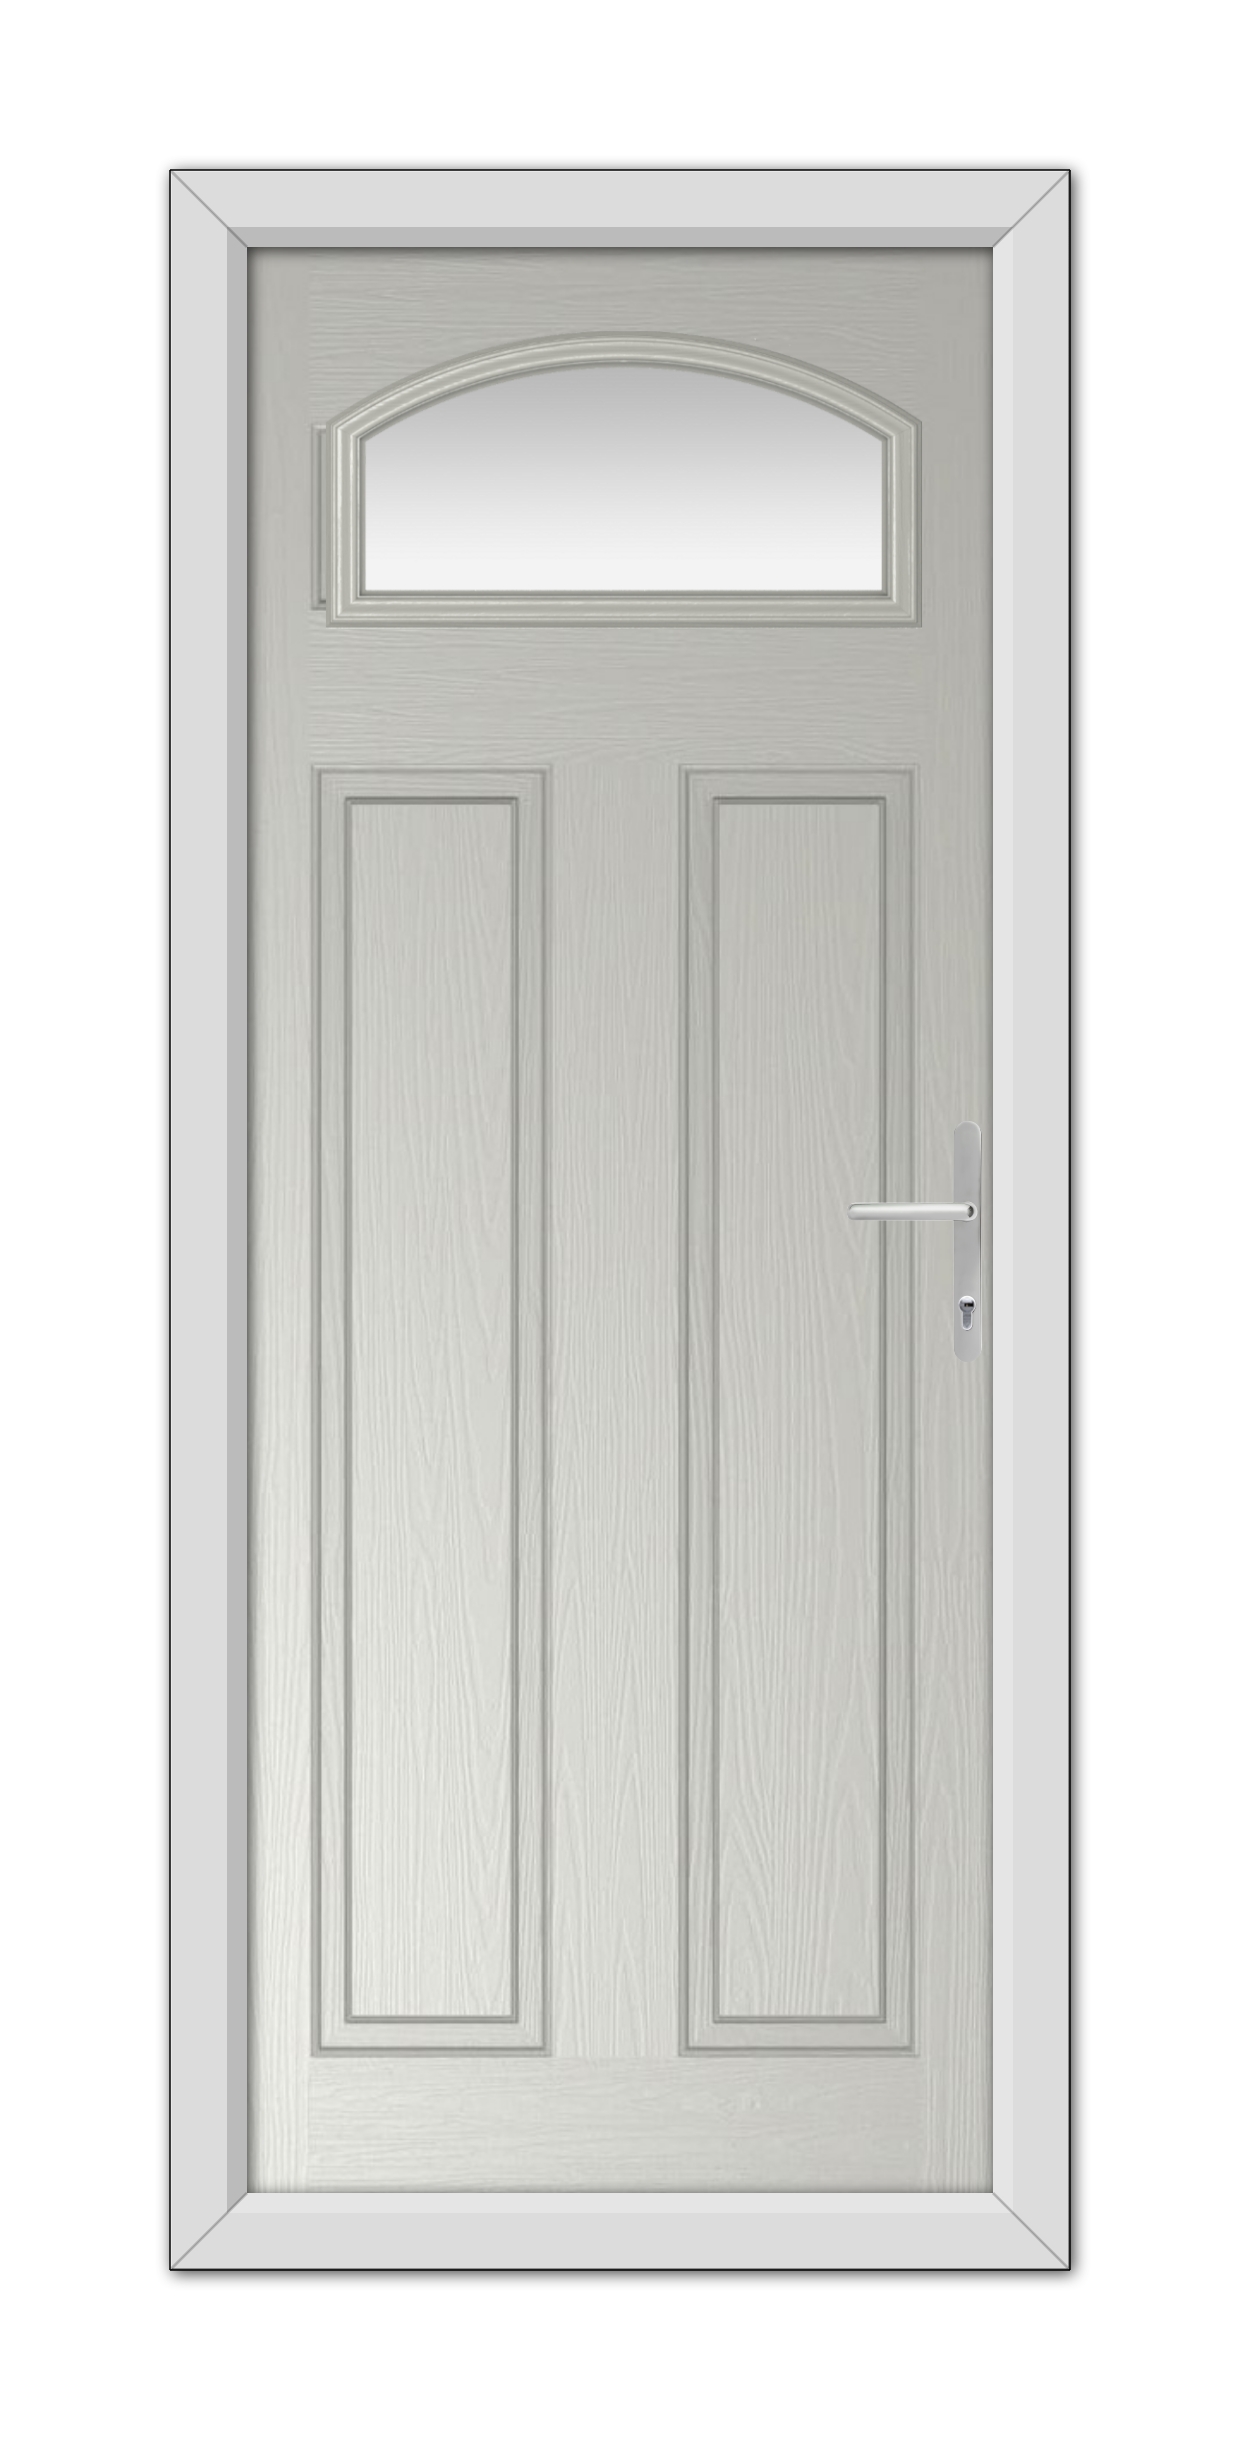 A modern Agate Grey Harlington Composite Door 48mm Timber Core with an arched window at the top and a metal handle on the right side.